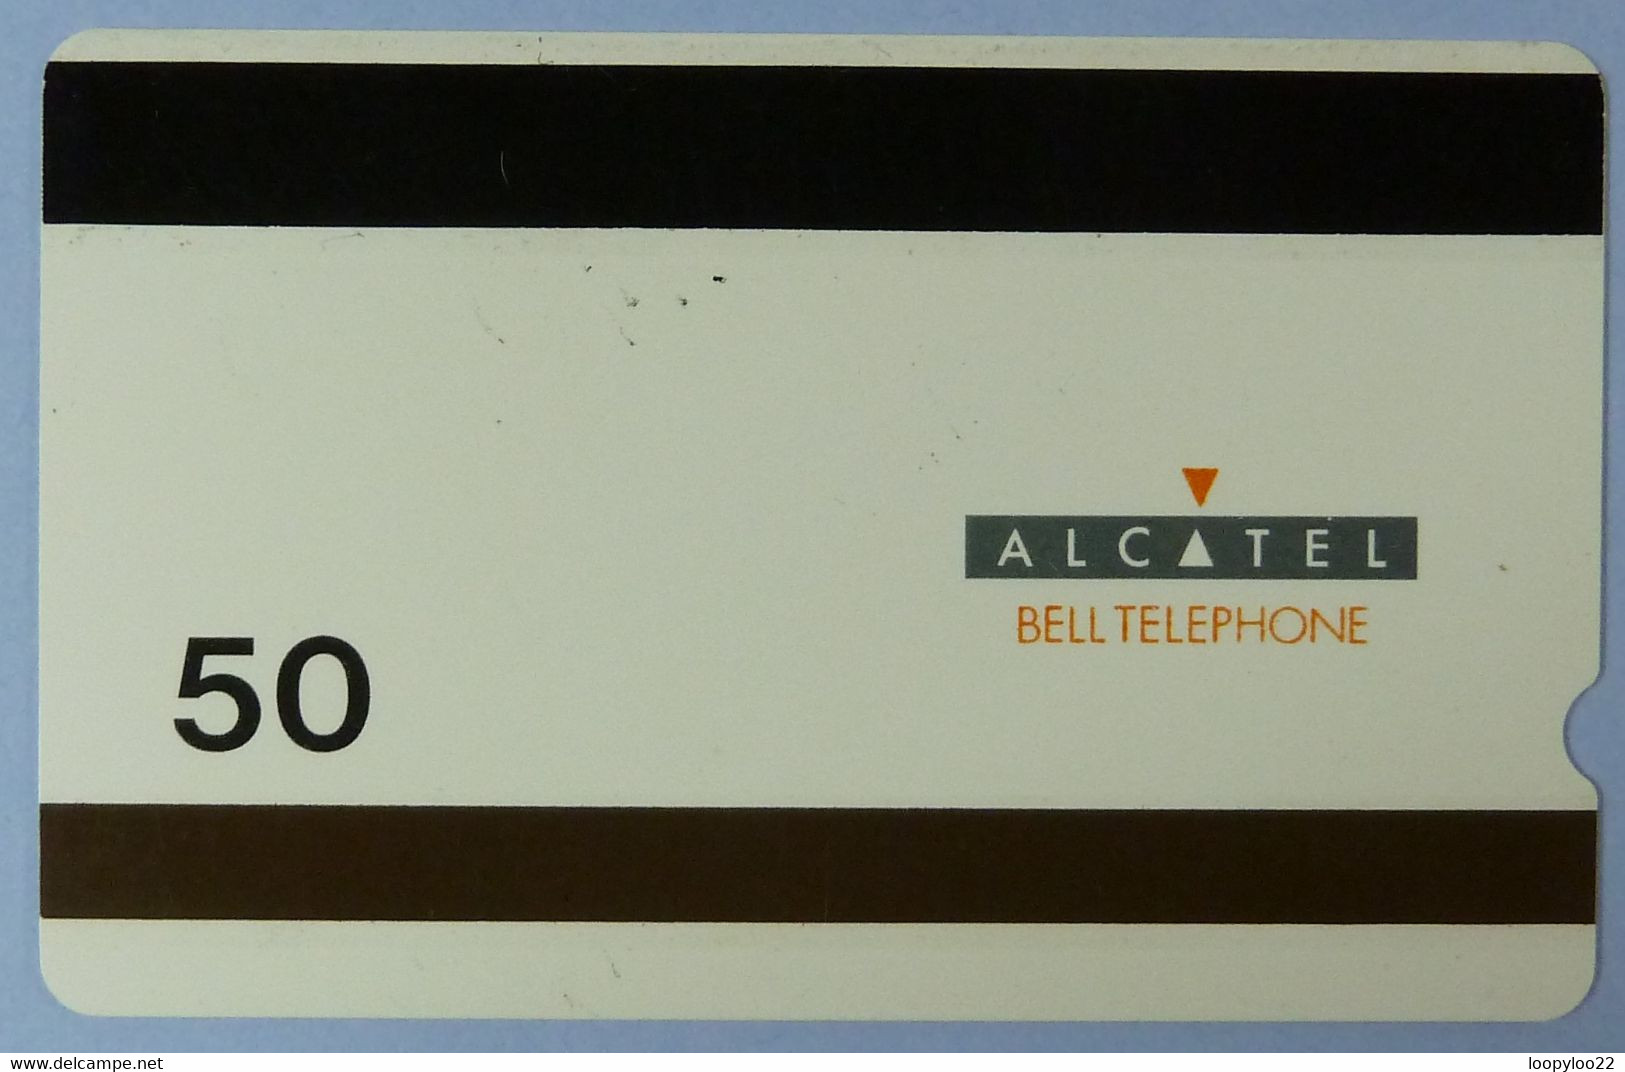 BELGIUM / POLAND- Alcatel - Credifaxphone (Man) - Magnetic - Field Trial / Test - 50 - Bell Telephone - Used - Dienst & Test